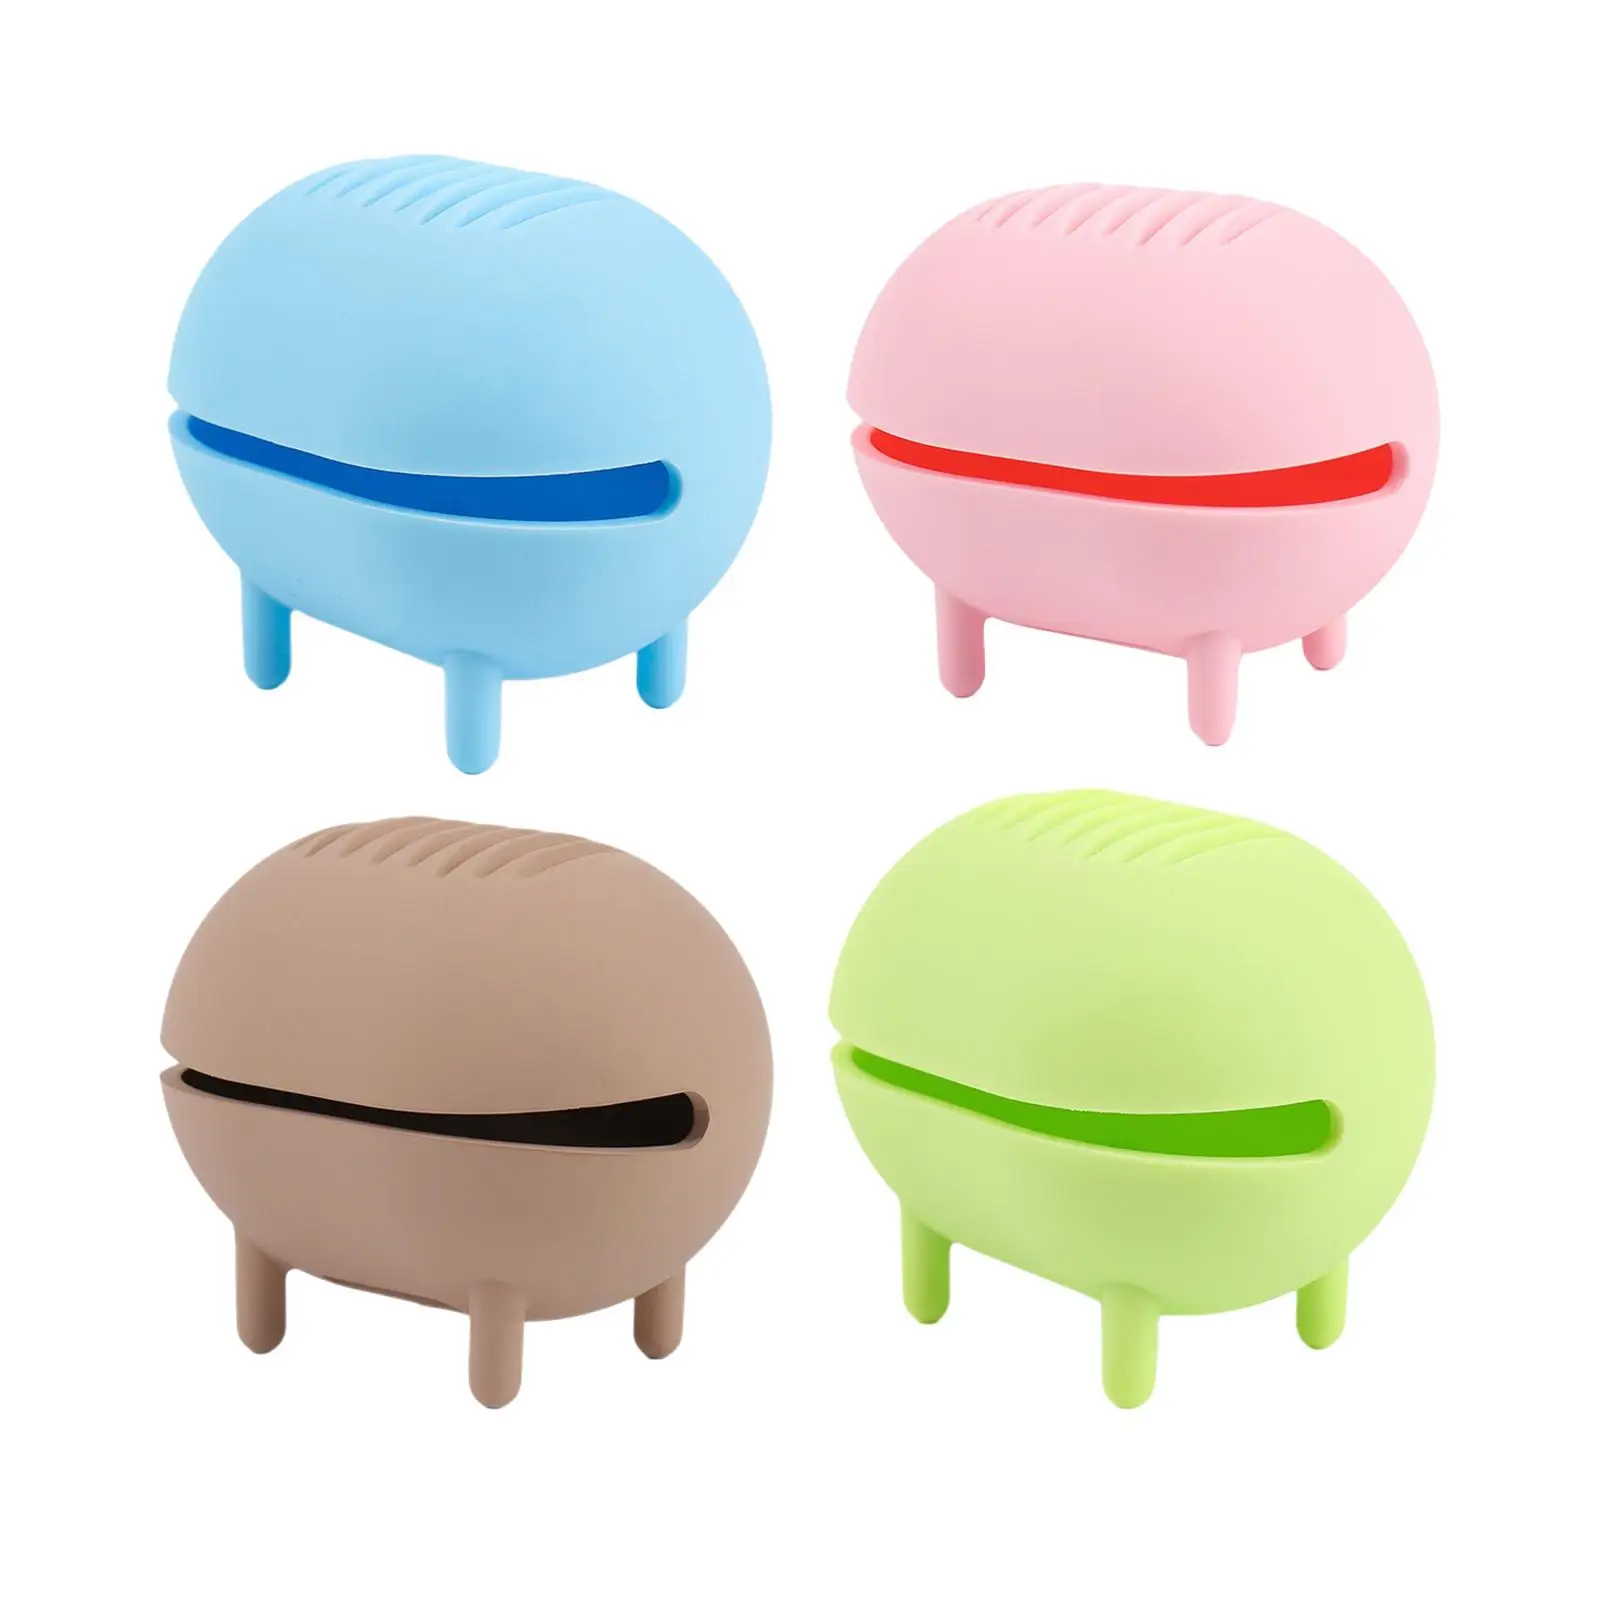 Dustproof Makeup Sponge Holder Puff Drying Silicone Breathable Organizer